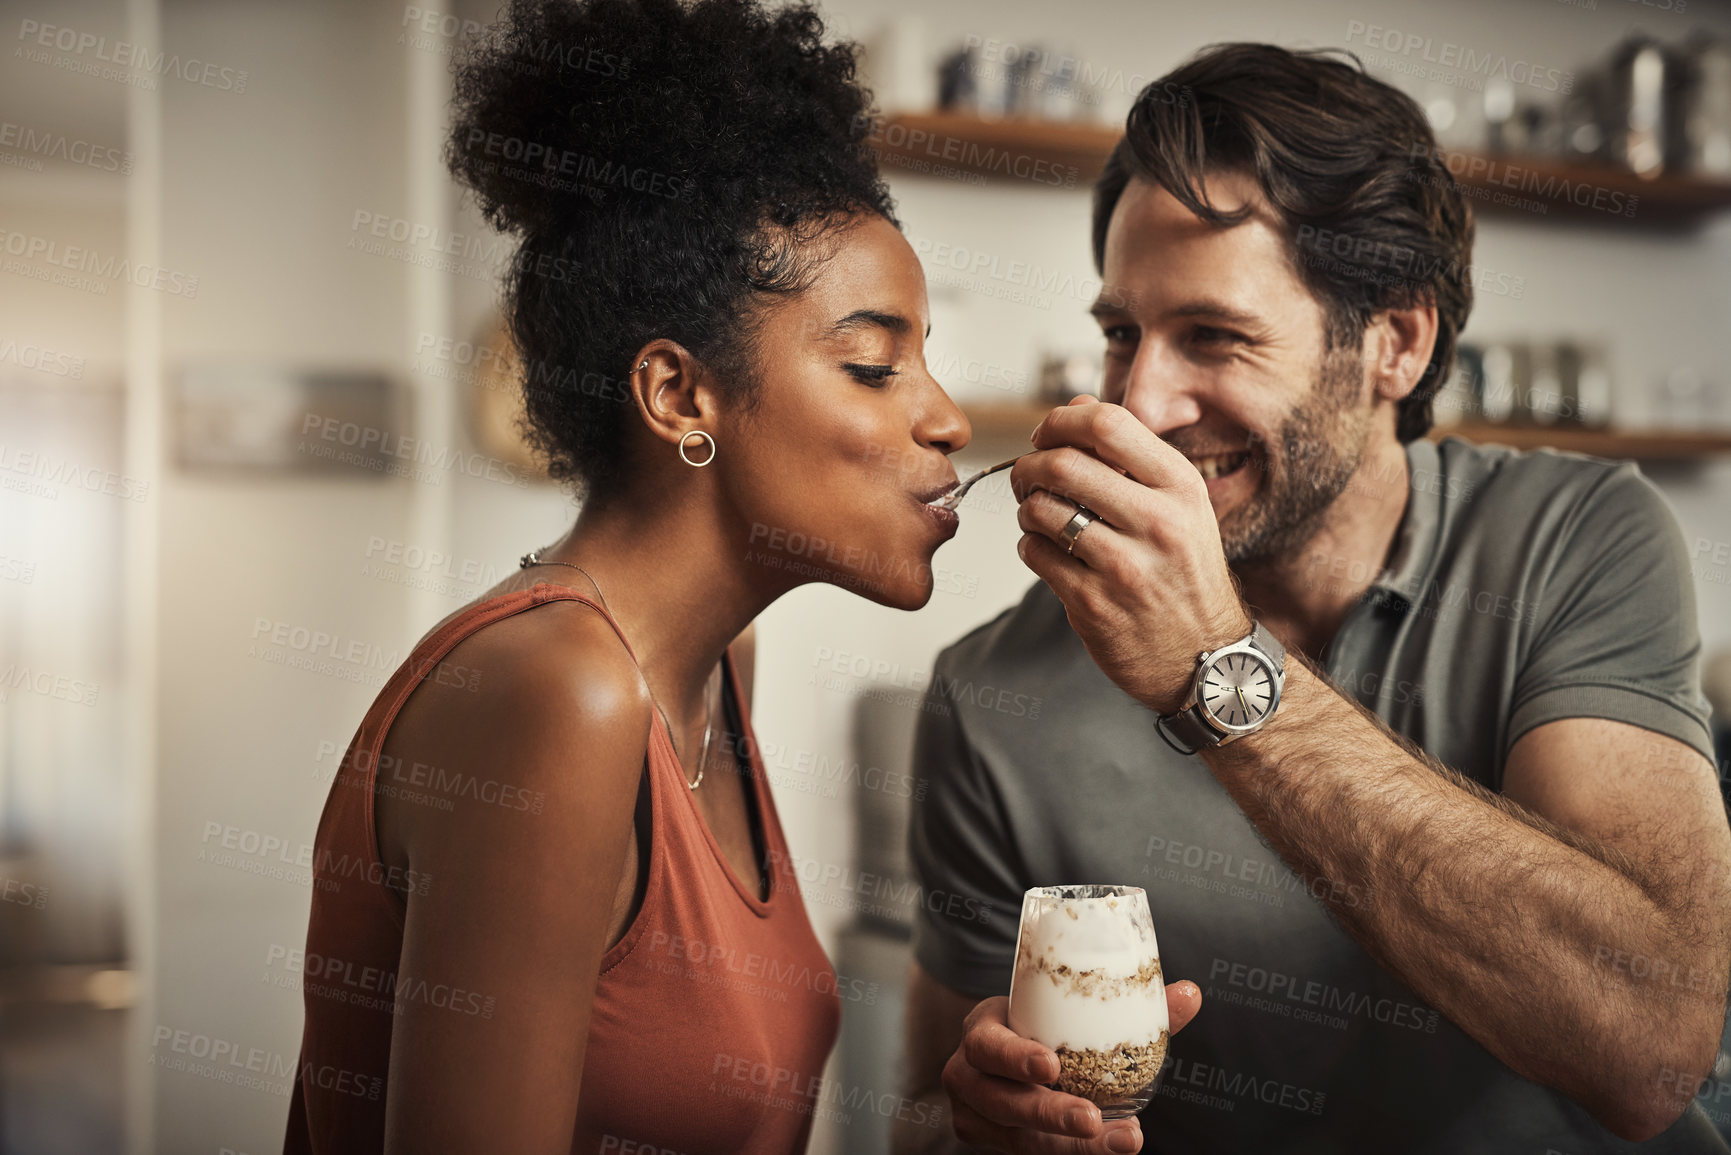 Buy stock photo Cropped shot of an affectionate middle aged man feeding his wife dessert in their kitchen at home